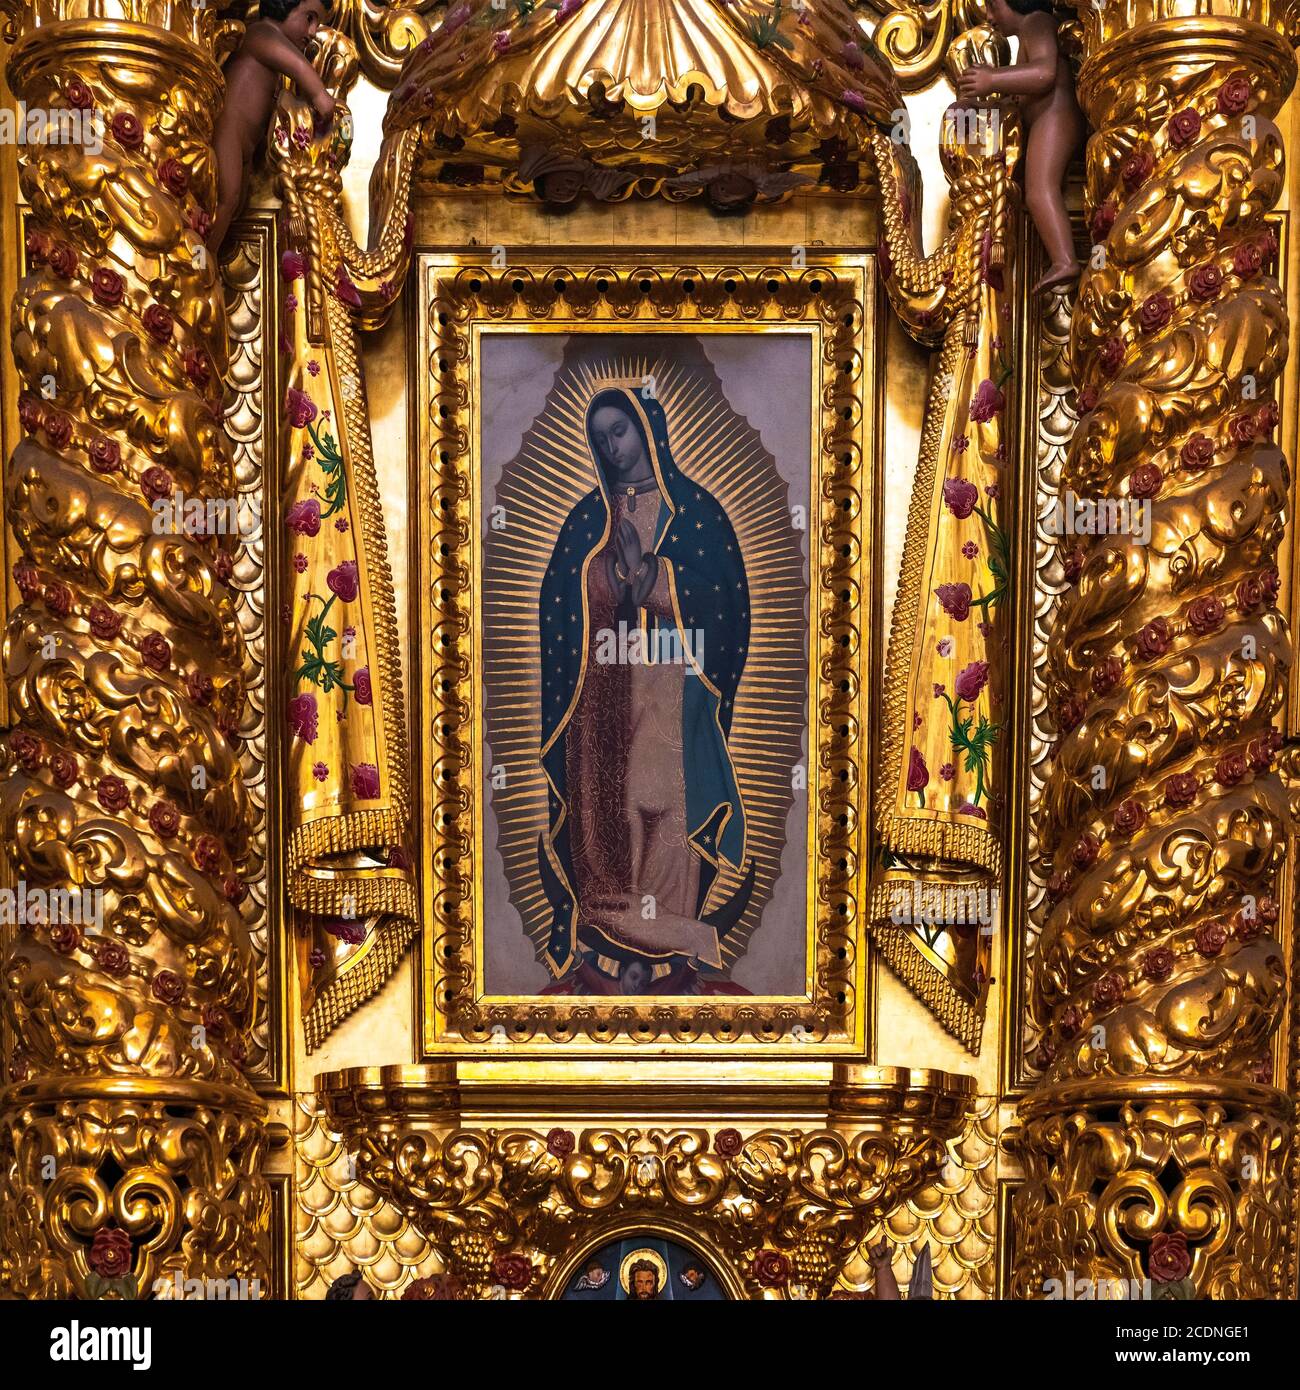 Virgin Mary Lady Of Guadalupe Statue From Mexico Lagoagriogobec